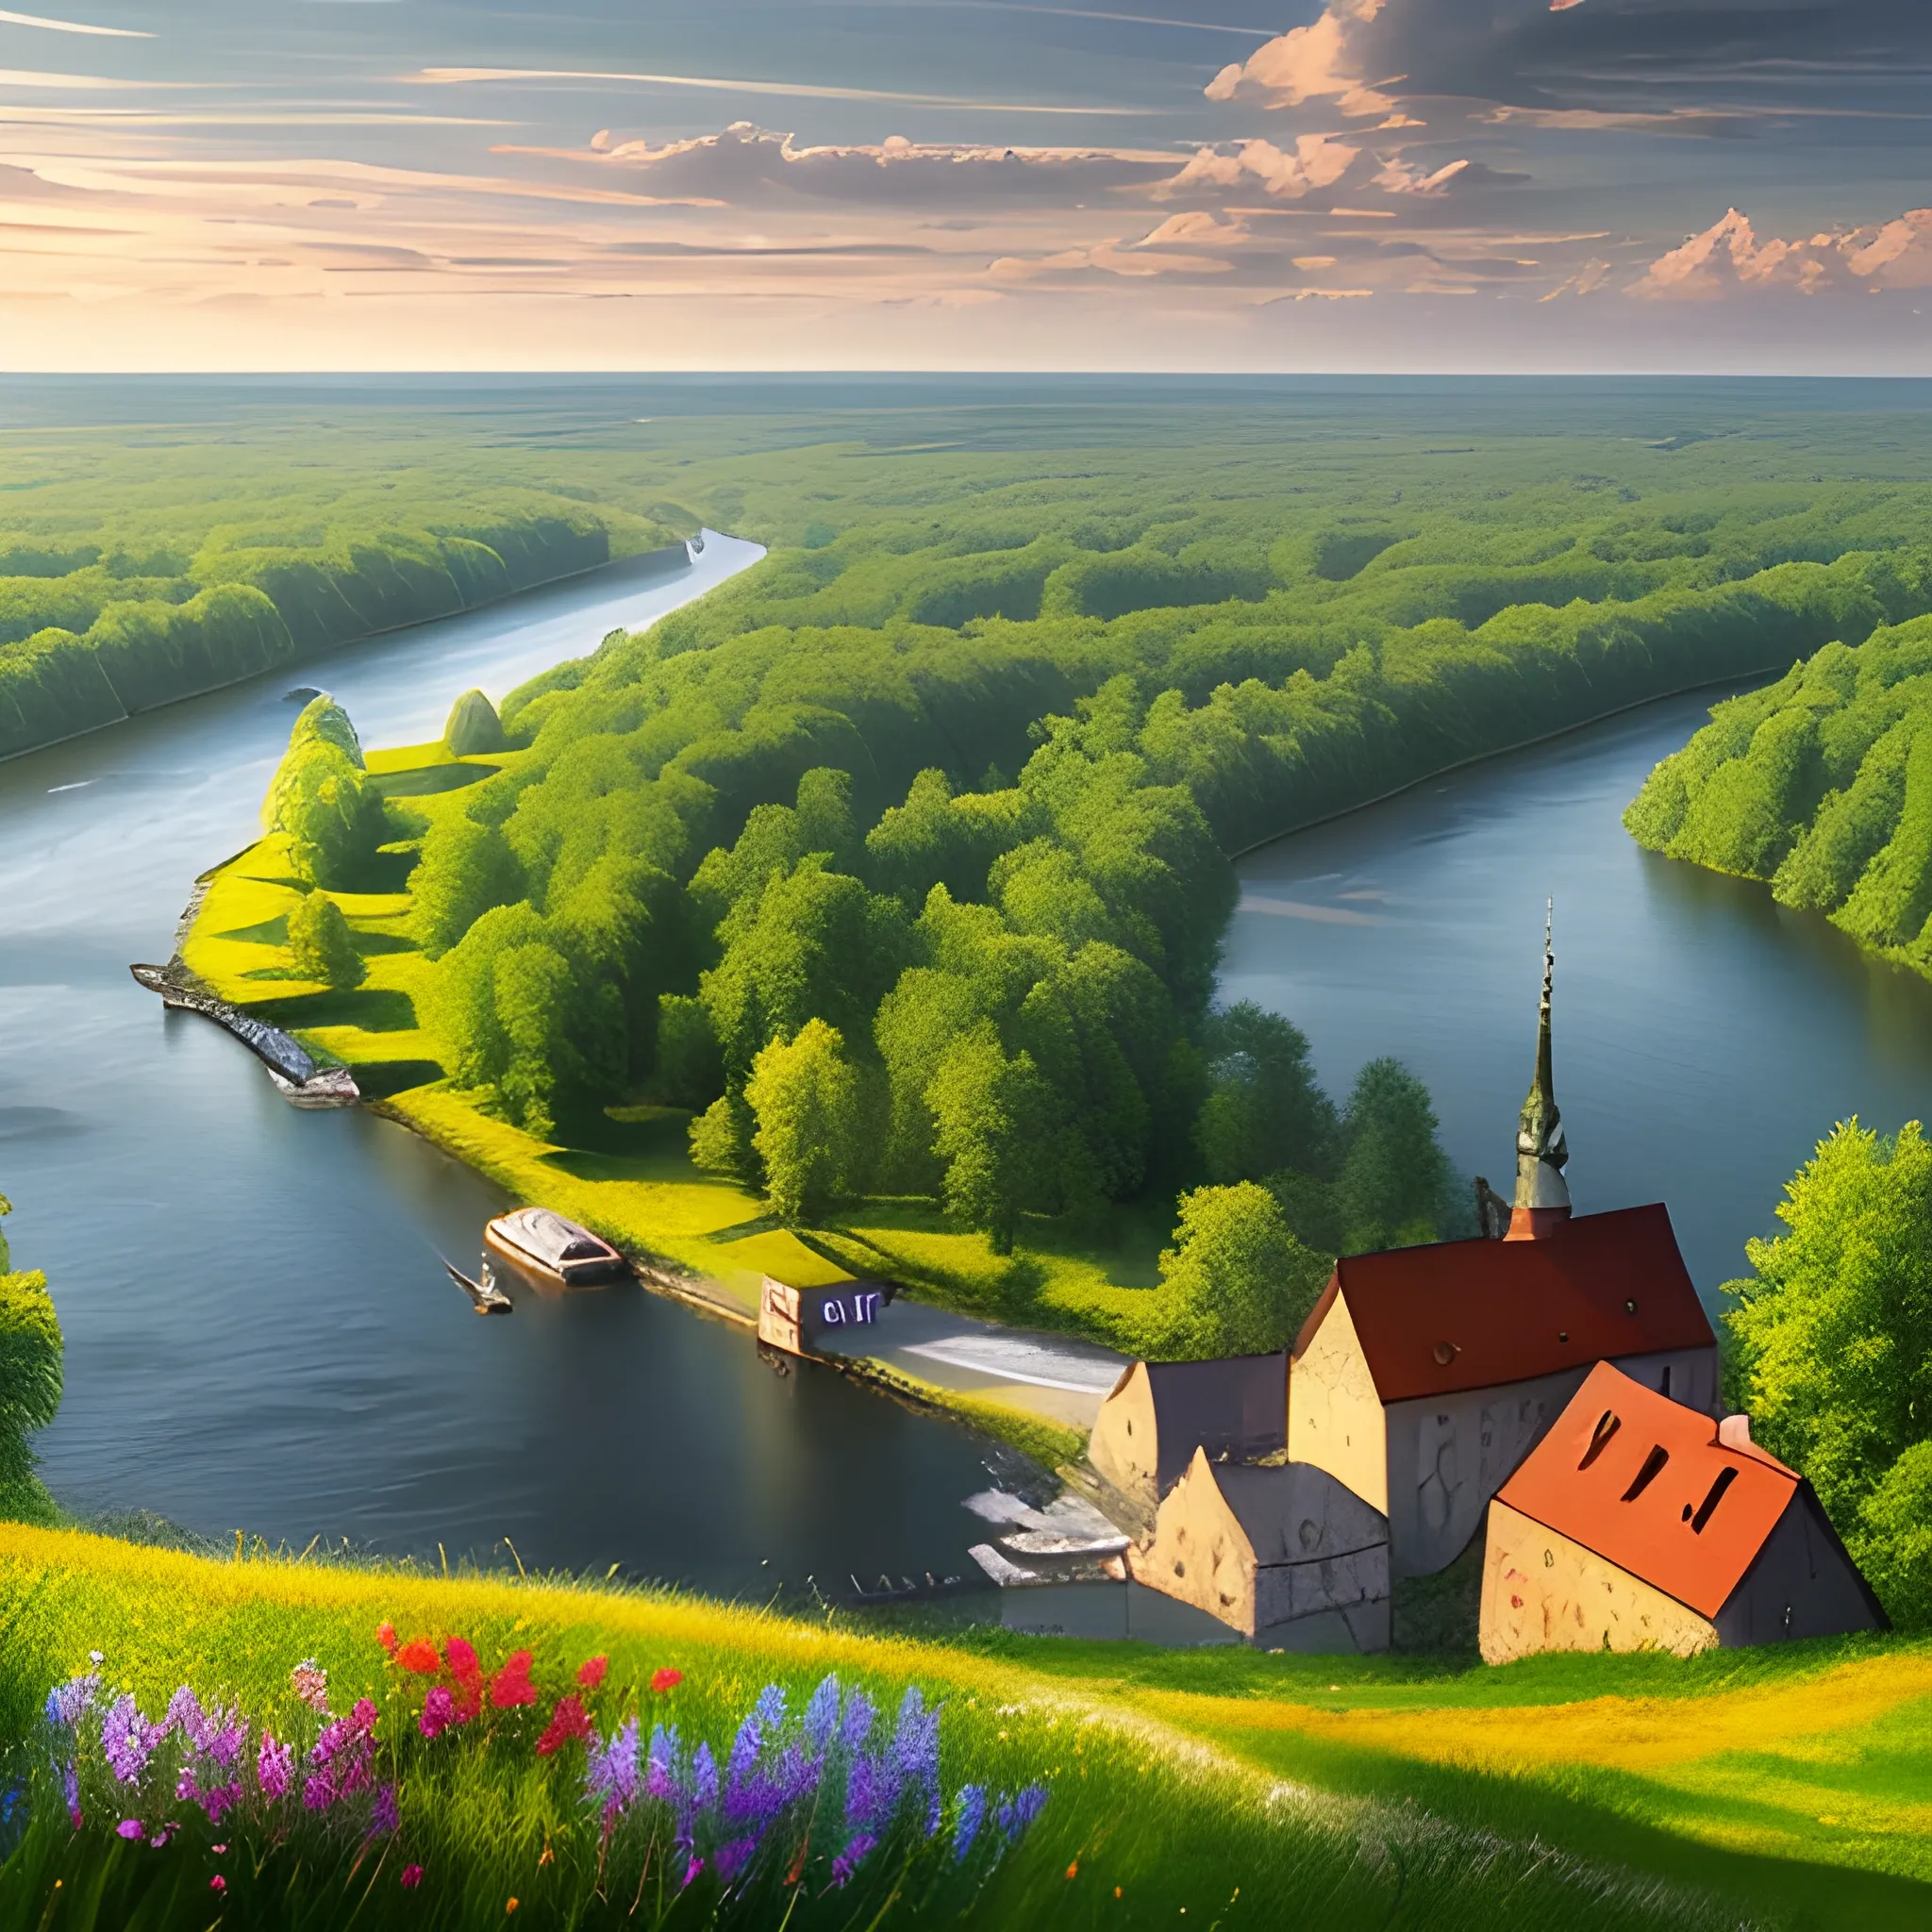 Draw a picturesque view of Poland showcasing the diverse landscapes and landmarks of the country. Fill the entire frame with the picture, do not leave any border.